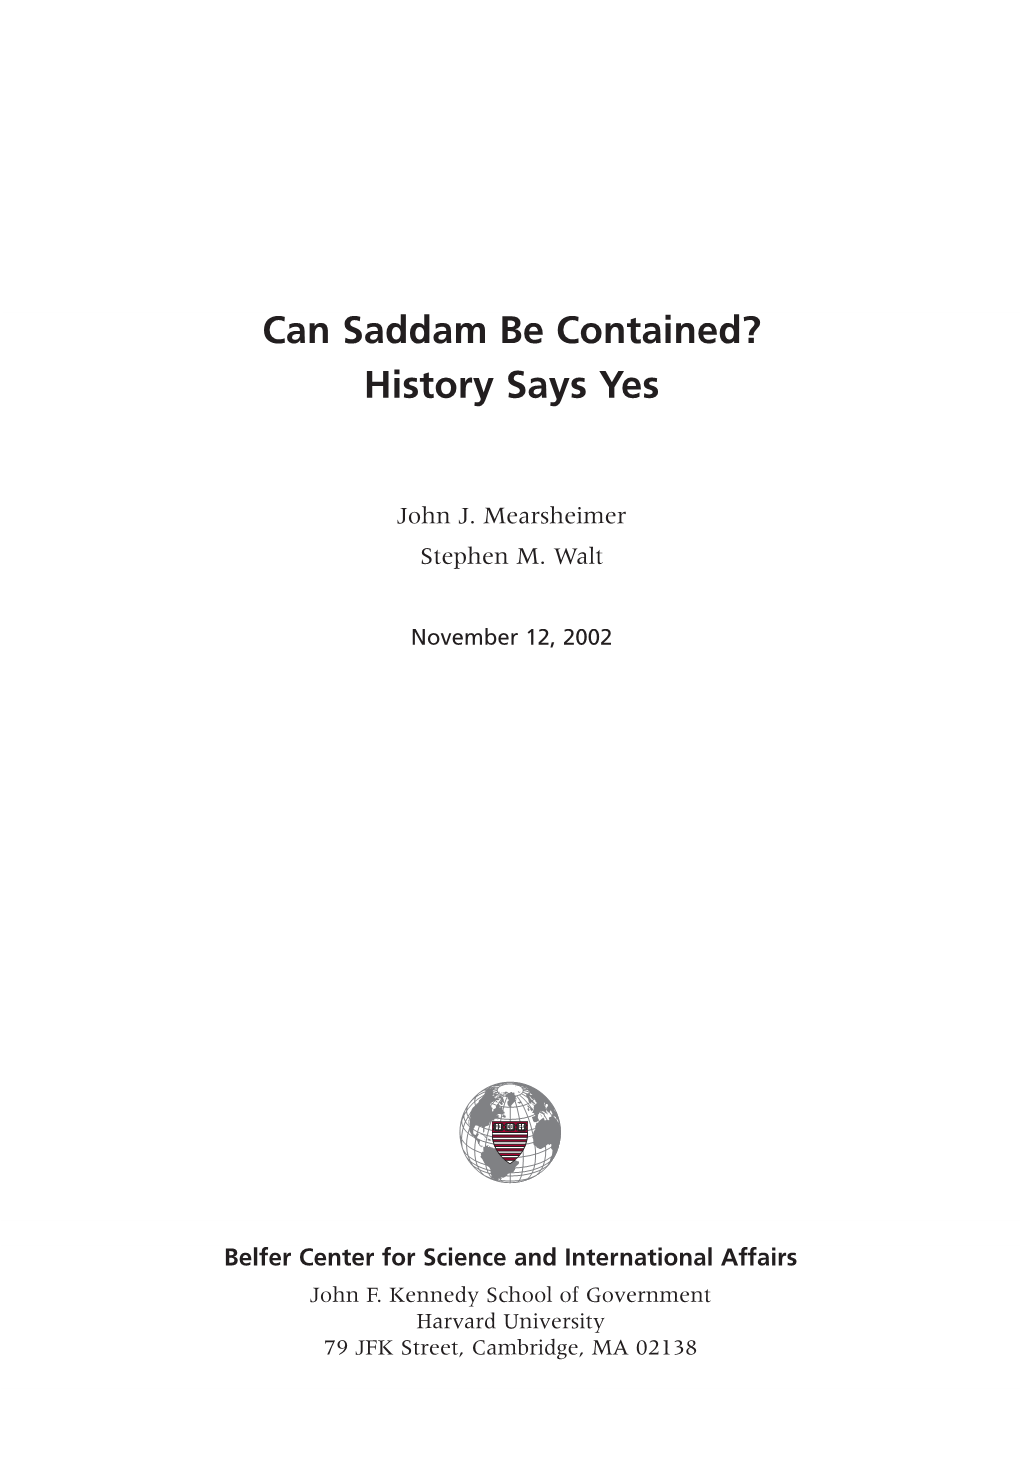 Can Saddam Be Contained? History Says Yes